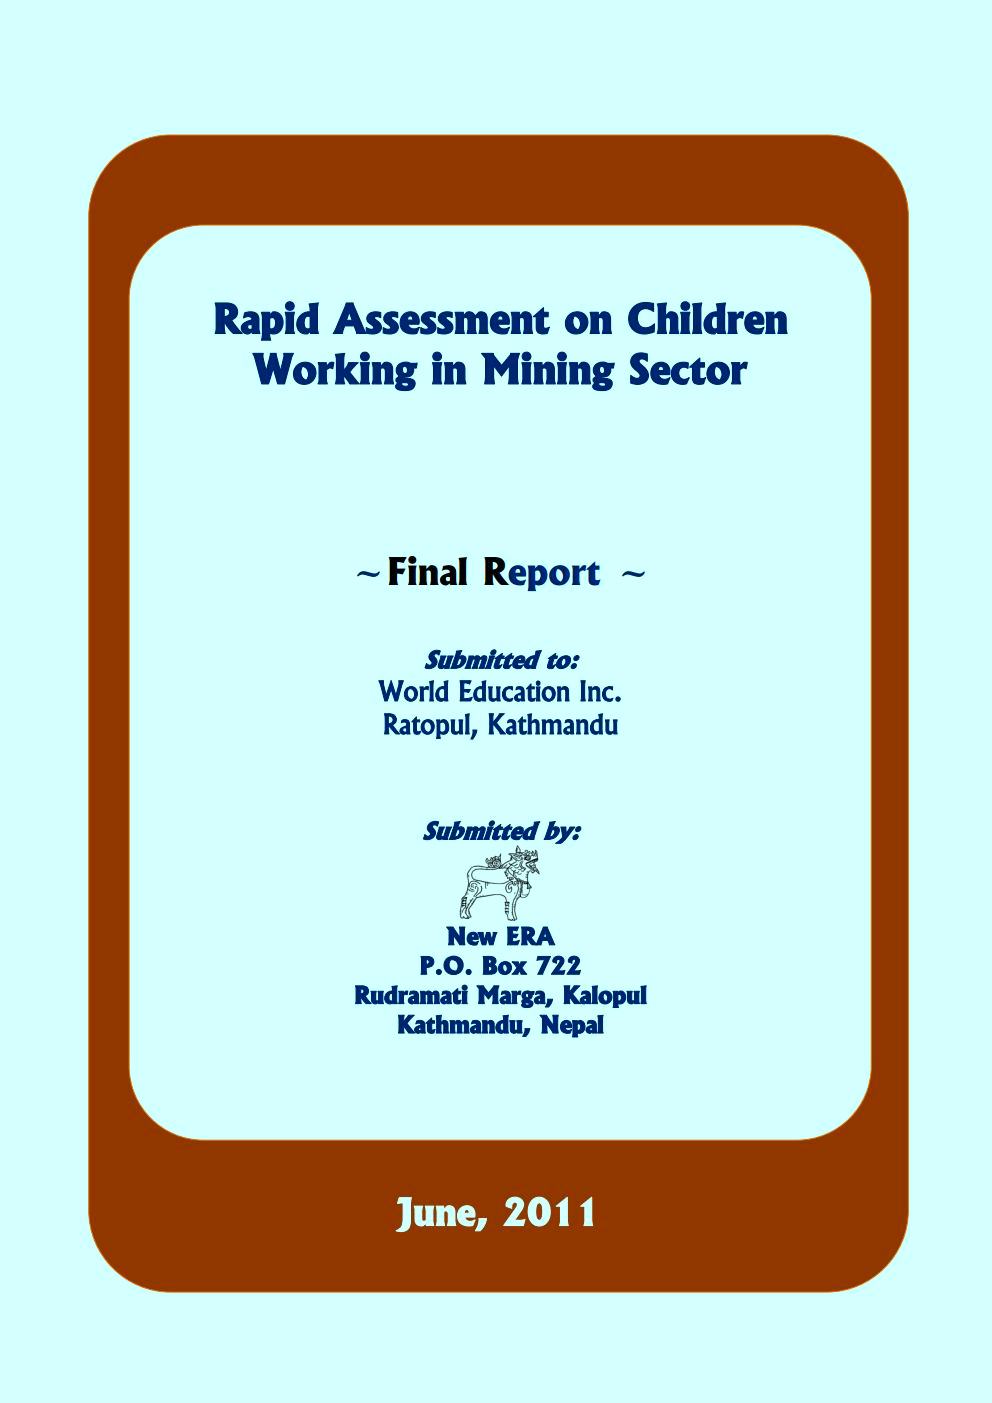 Rapid Assessment on Children Working in Mining Sector